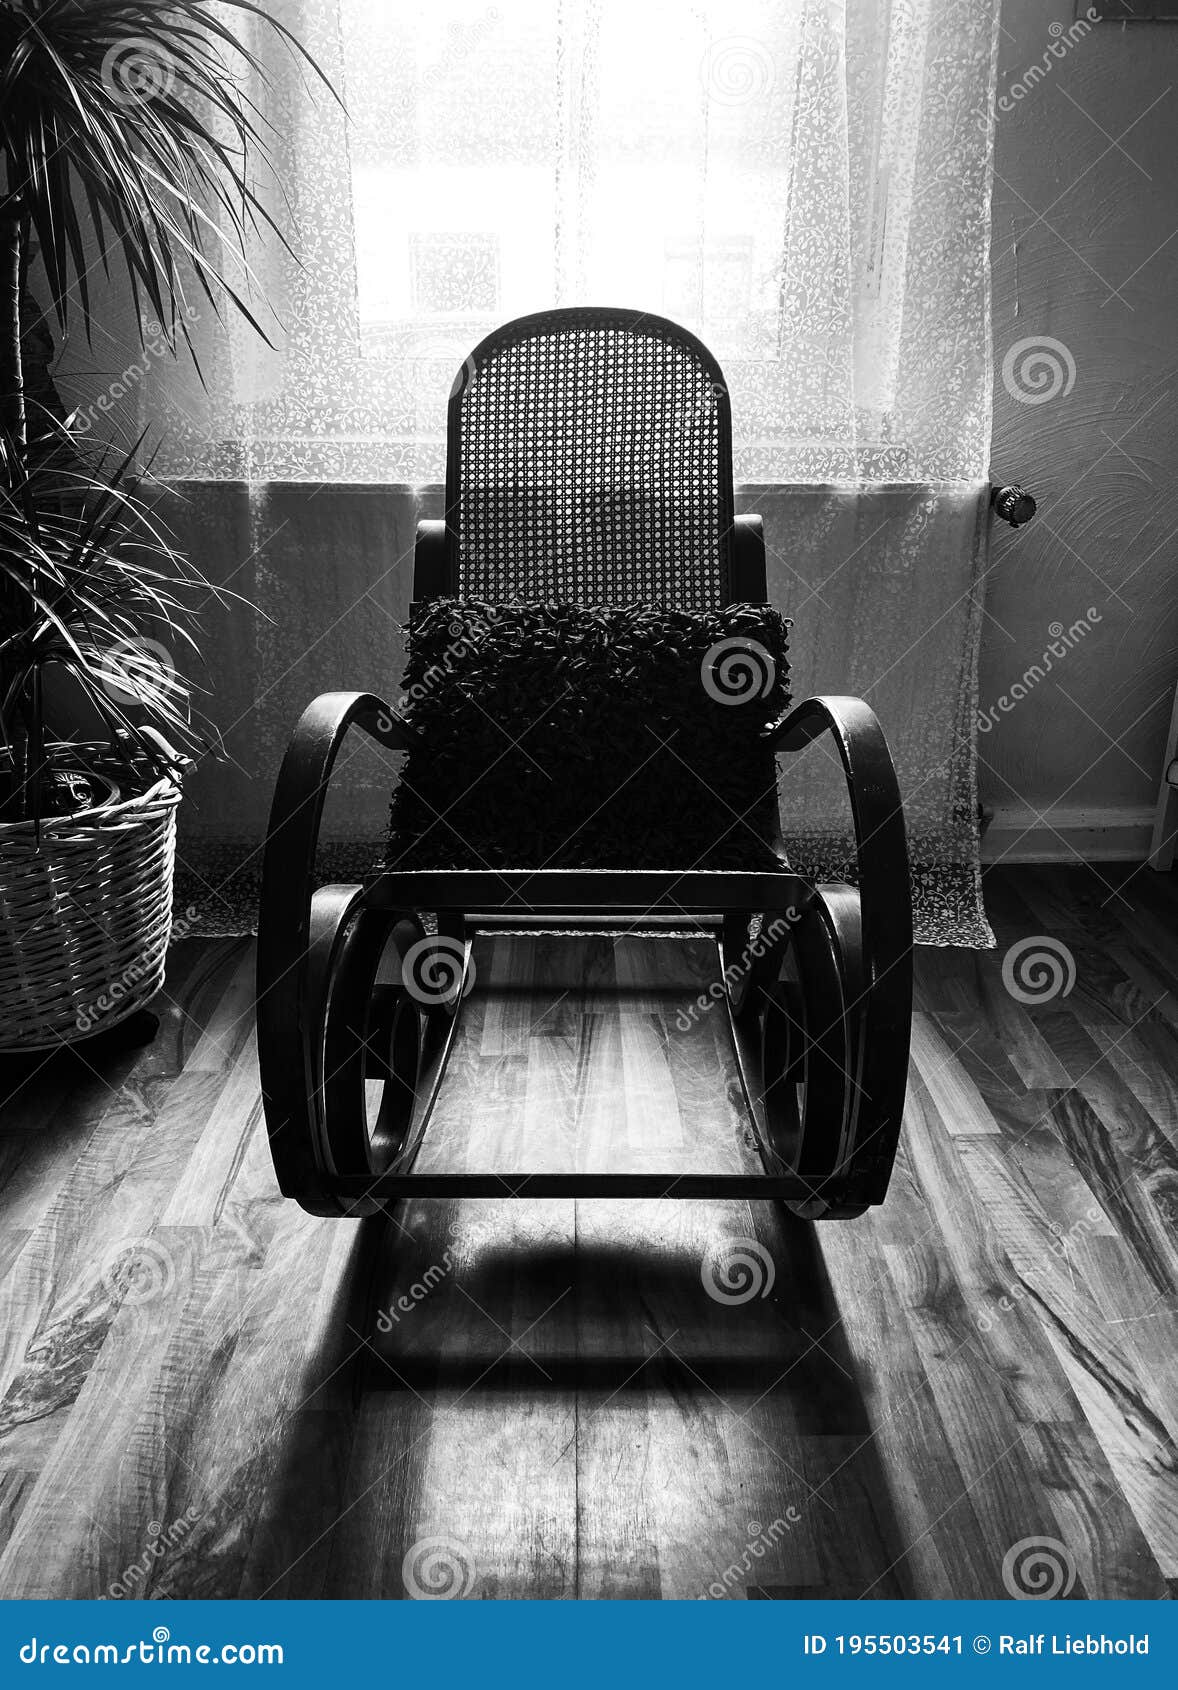 view on empty rocking chair in living room with shadow from backlight of window - grieve and loss of loved person concept